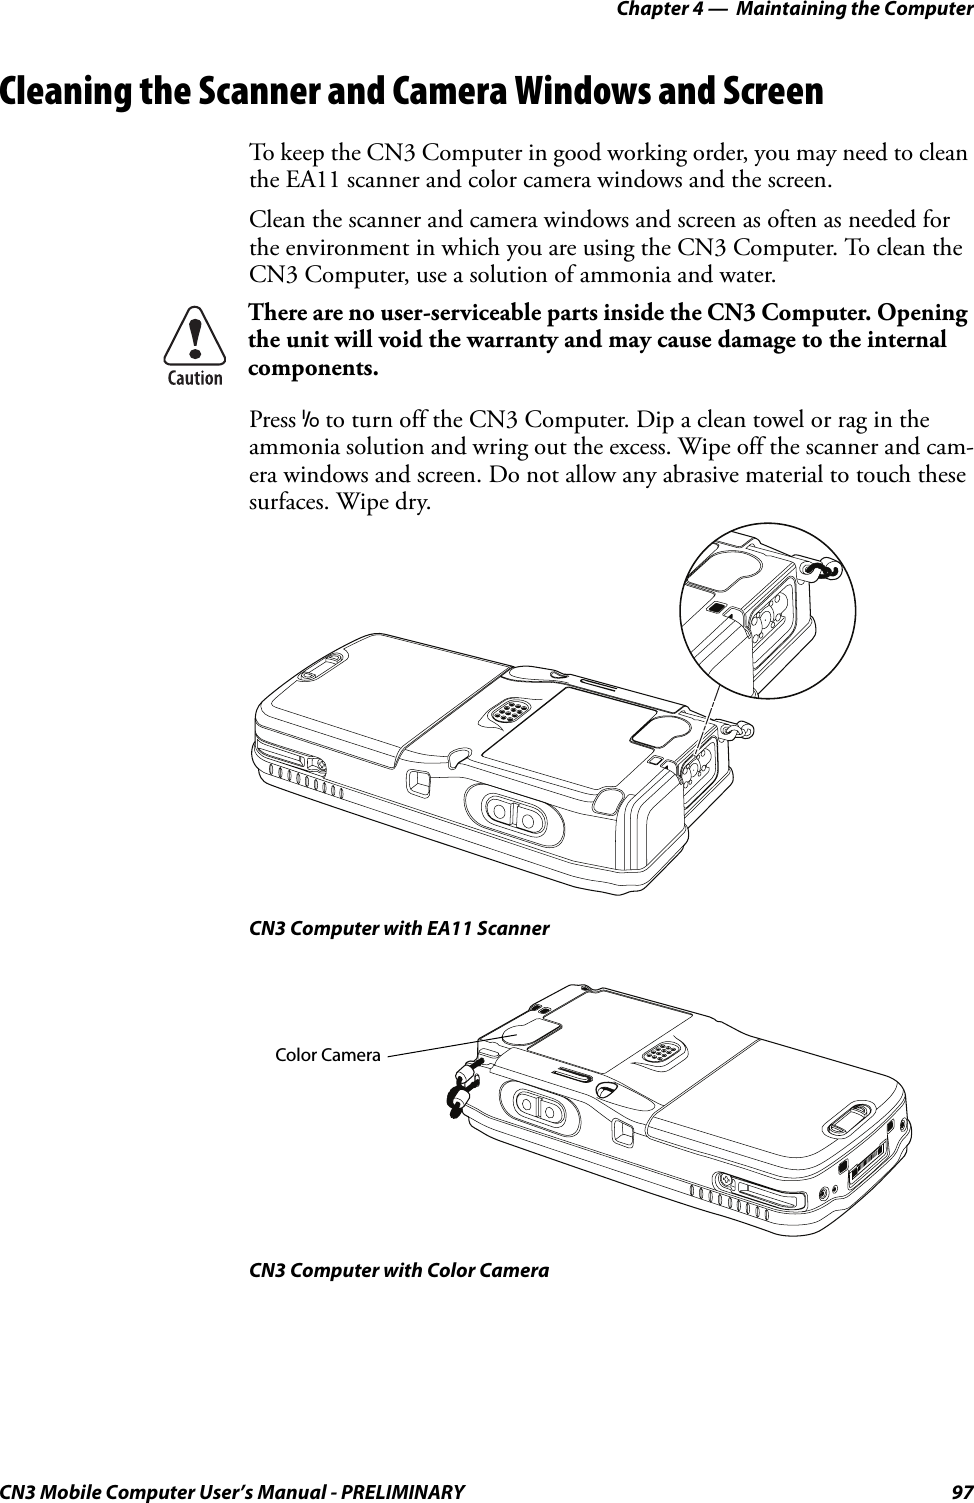 Chapter 4 —  Maintaining the ComputerCN3 Mobile Computer User’s Manual - PRELIMINARY 97Cleaning the Scanner and Camera Windows and ScreenTo keep the CN3 Computer in good working order, you may need to clean the EA11 scanner and color camera windows and the screen.Clean the scanner and camera windows and screen as often as needed for the environment in which you are using the CN3 Computer. To clean the CN3 Computer, use a solution of ammonia and water.Press I to turn off the CN3 Computer. Dip a clean towel or rag in the ammonia solution and wring out the excess. Wipe off the scanner and cam-era windows and screen. Do not allow any abrasive material to touch these surfaces. Wipe dry.CN3 Computer with EA11 ScannerCN3 Computer with Color CameraThere are no user-serviceable parts inside the CN3 Computer. Opening the unit will void the warranty and may cause damage to the internal components.Color Camera